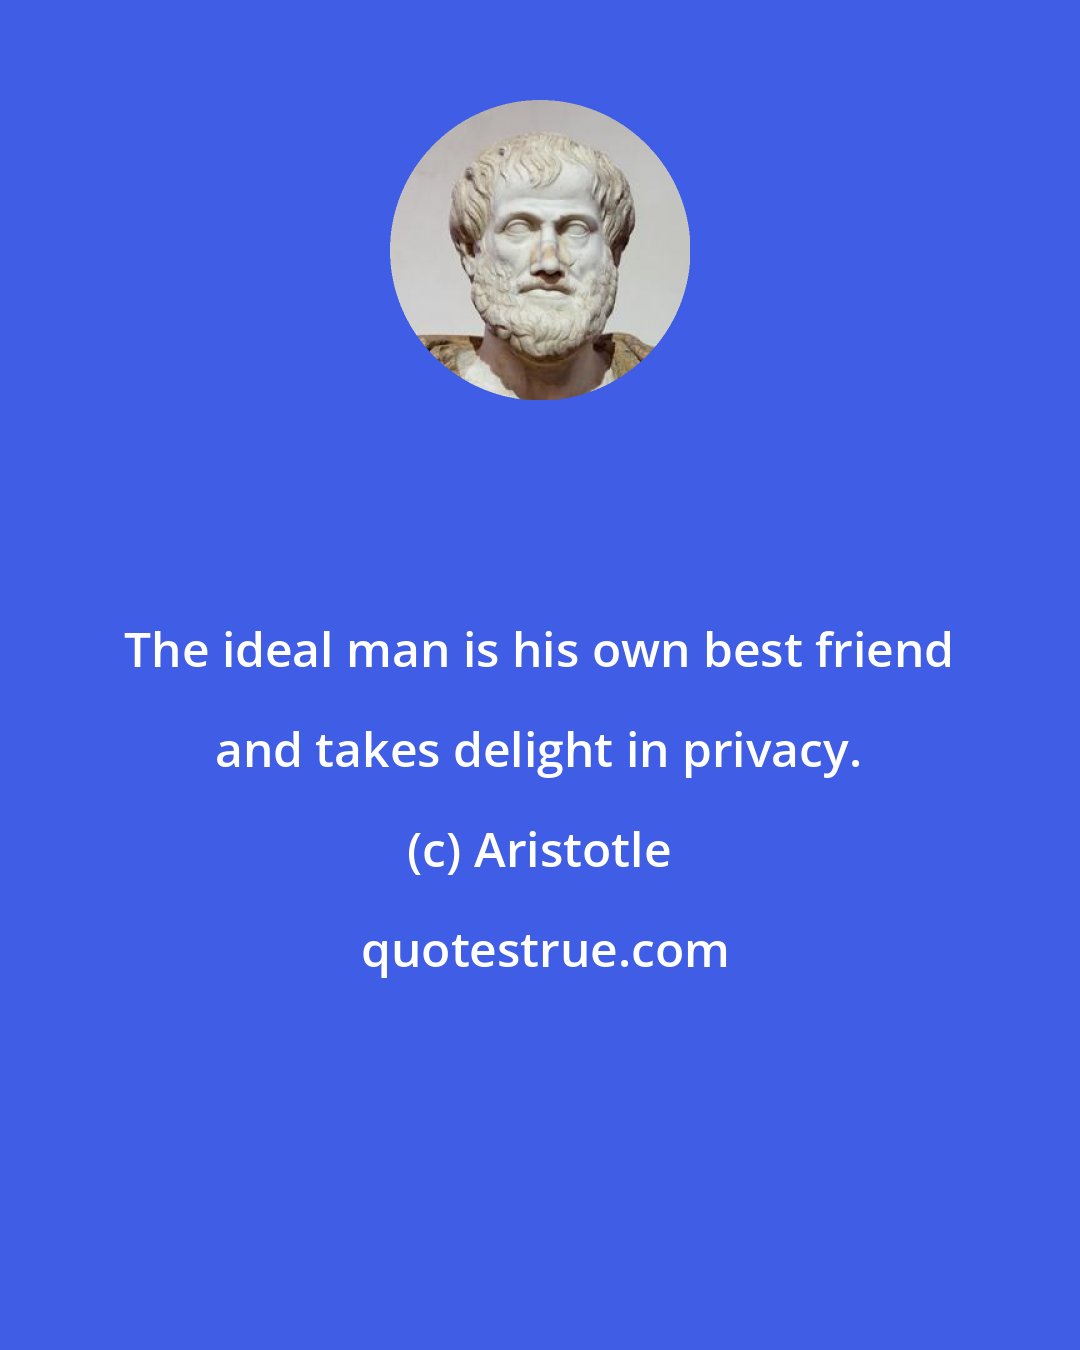 Aristotle: The ideal man is his own best friend and takes delight in privacy.